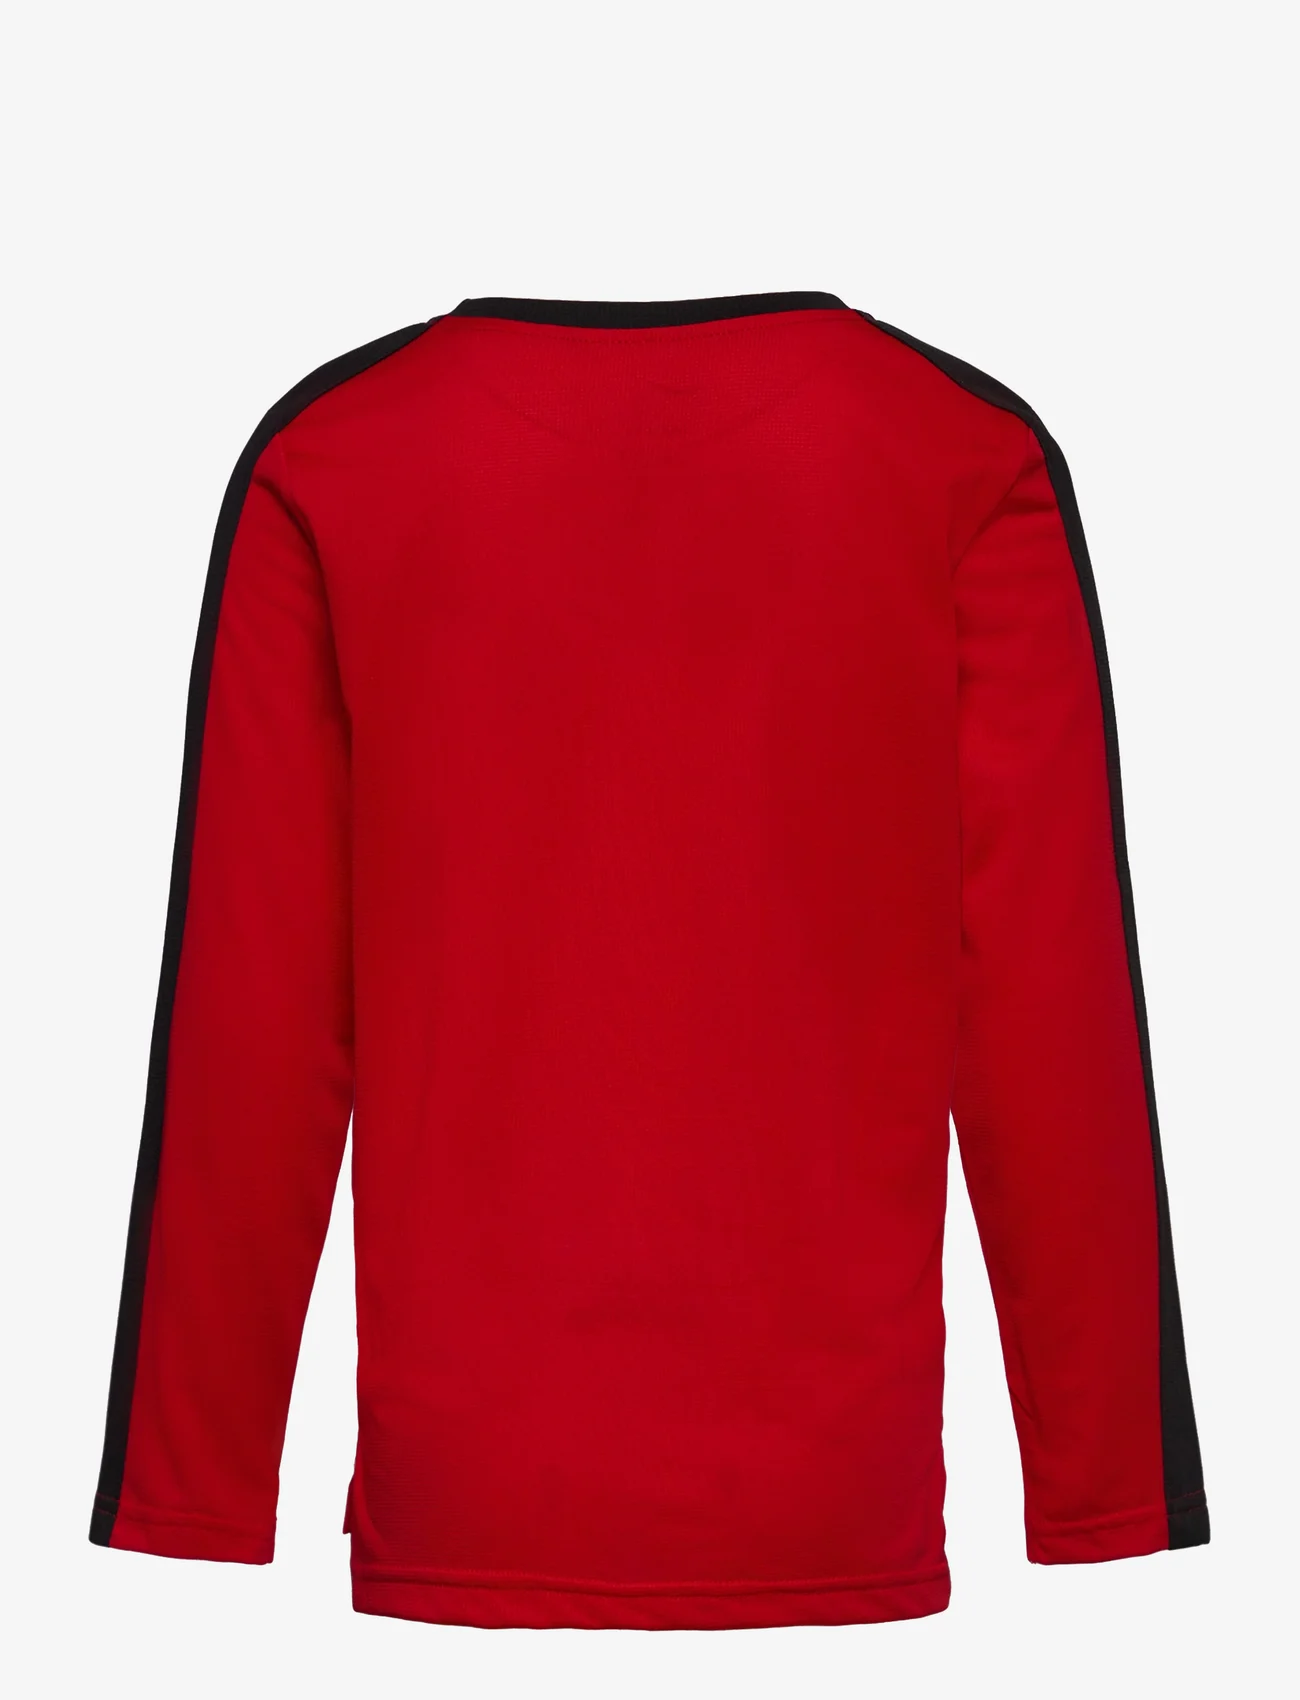 Nike - B NK ALL DAY PLAY LS KNIT TOP - langärmelig - university red - 1